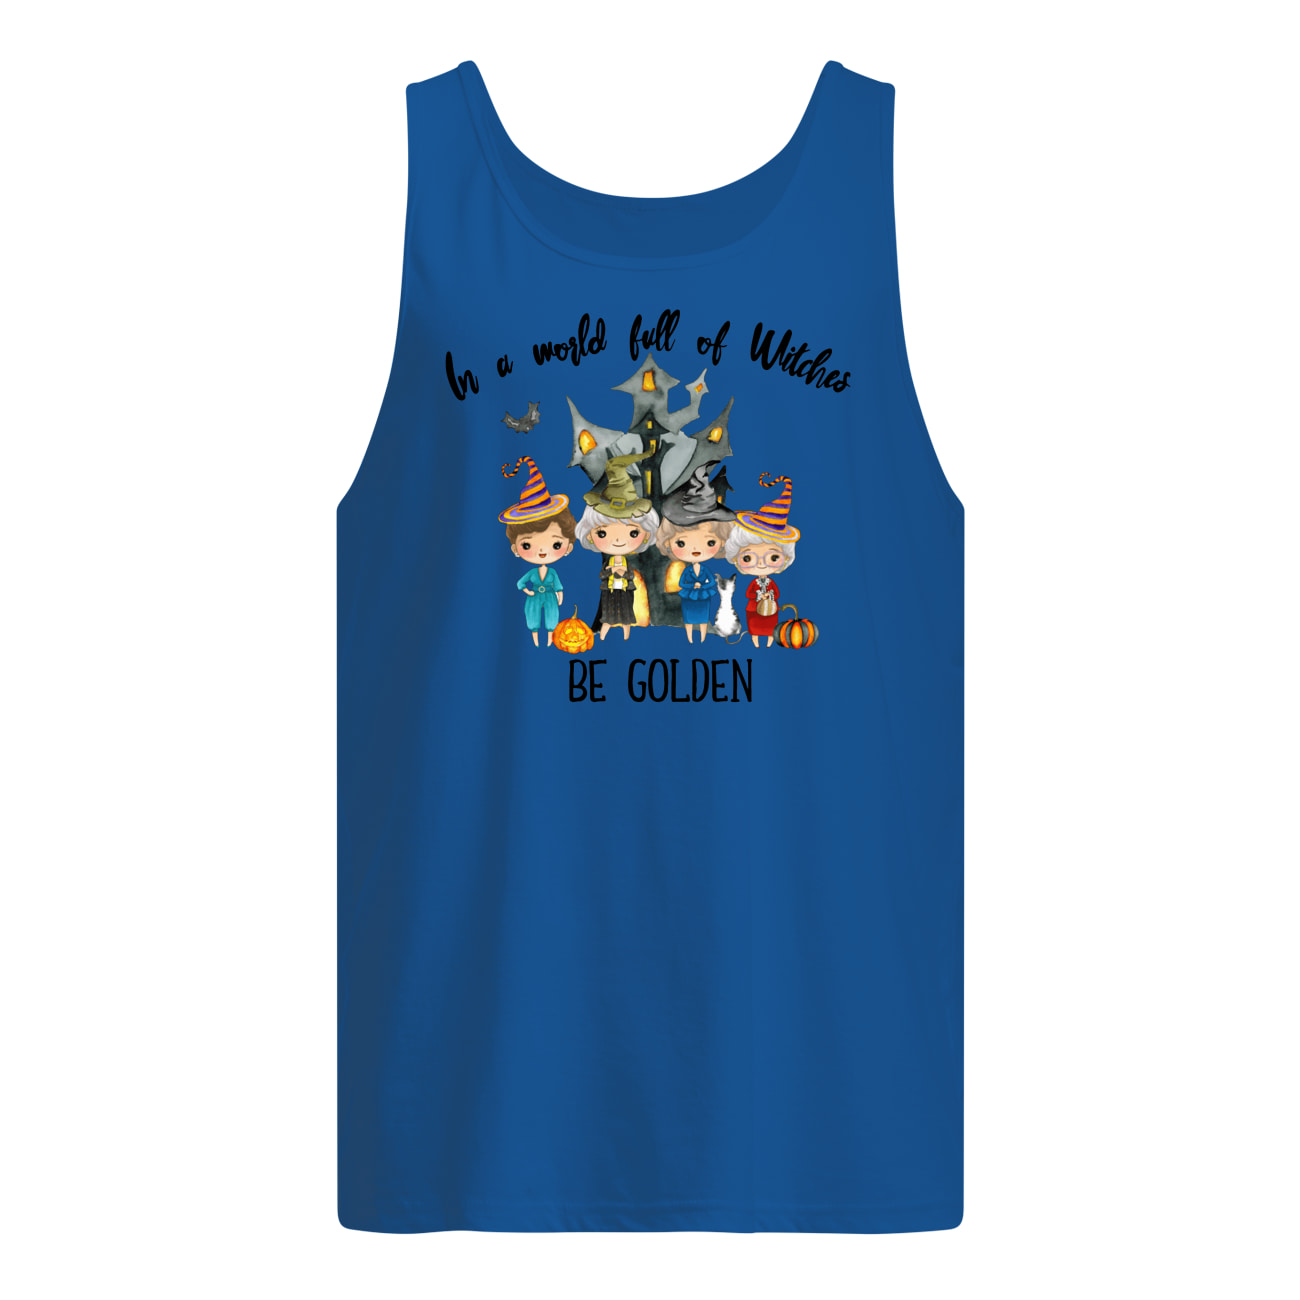 The golden girls in a world full of witches be golden tank top